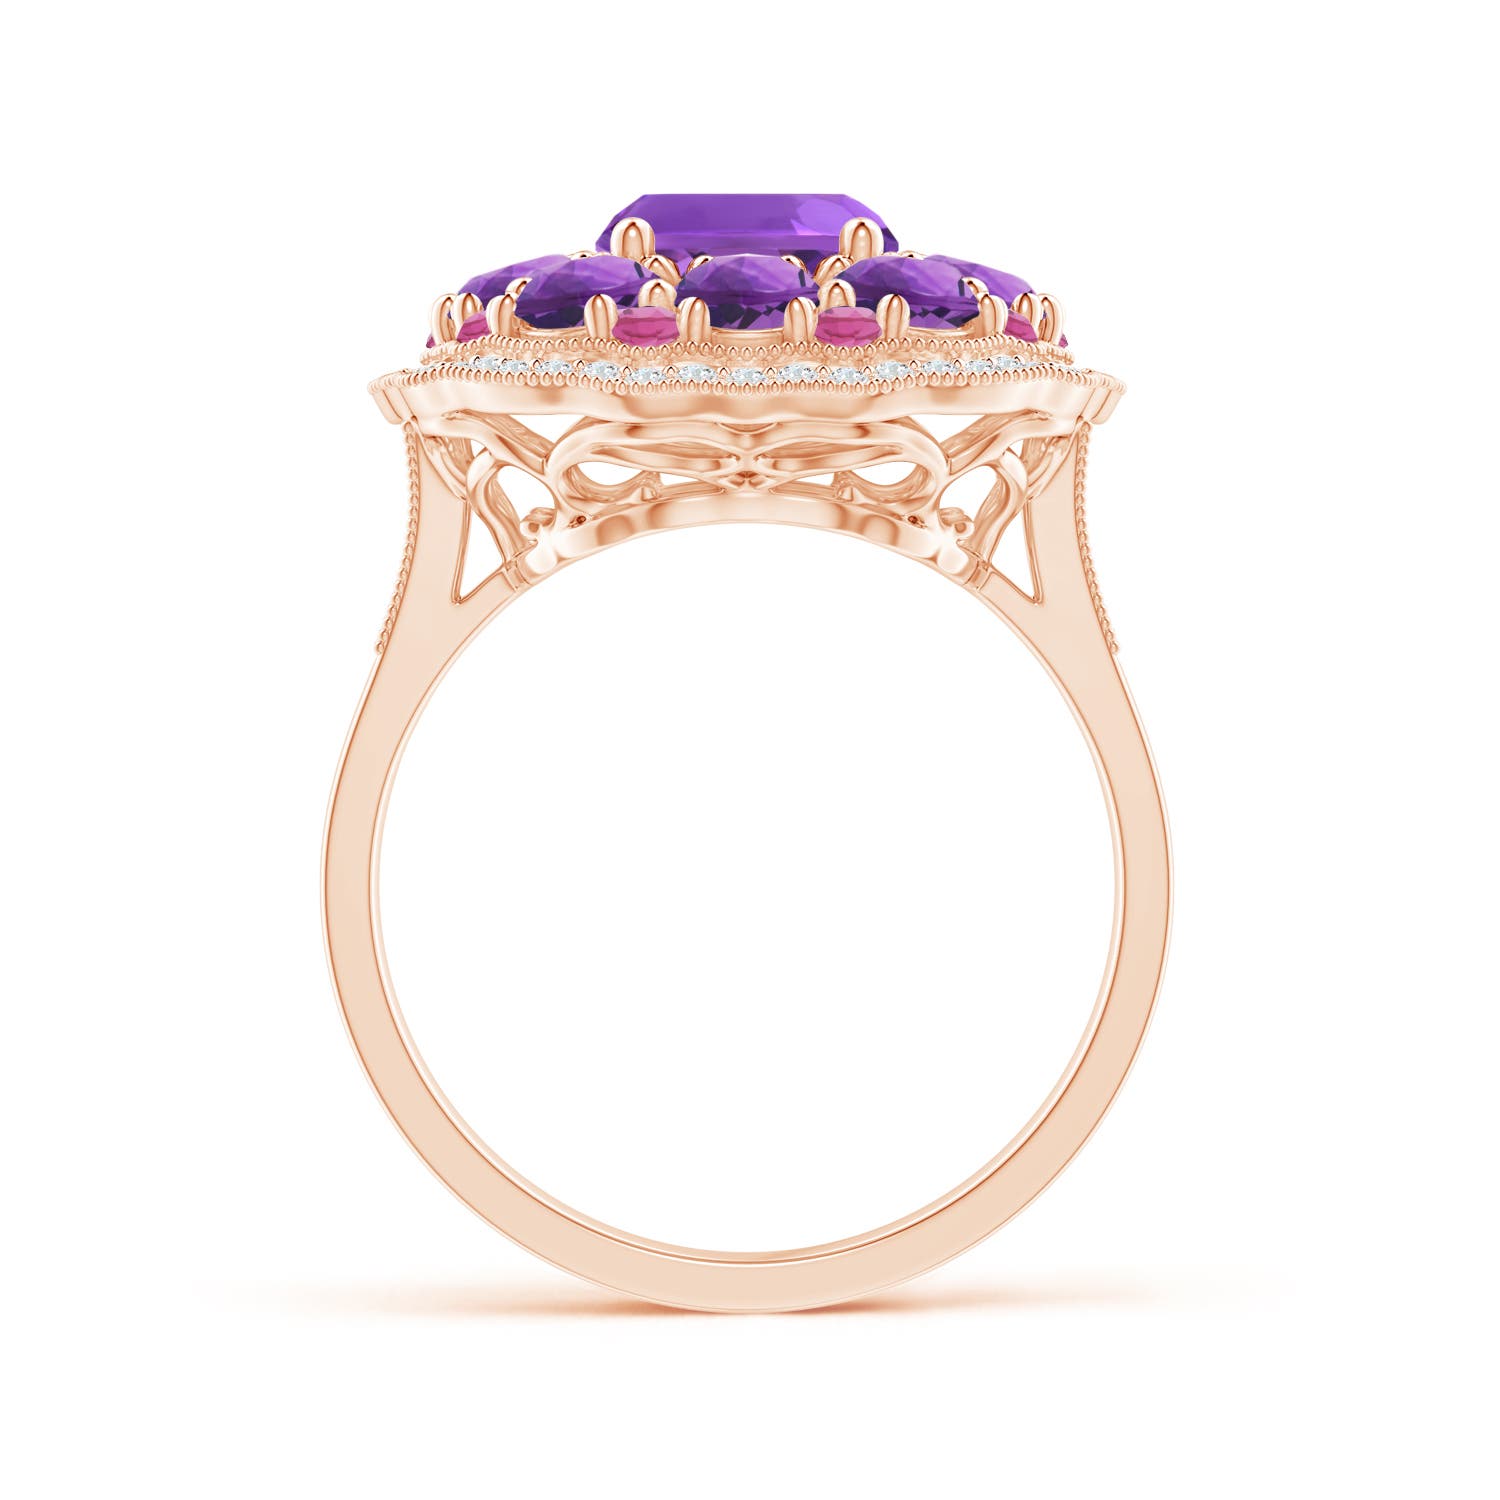 AAA - Amethyst / 4.12 CT / 14 KT Rose Gold